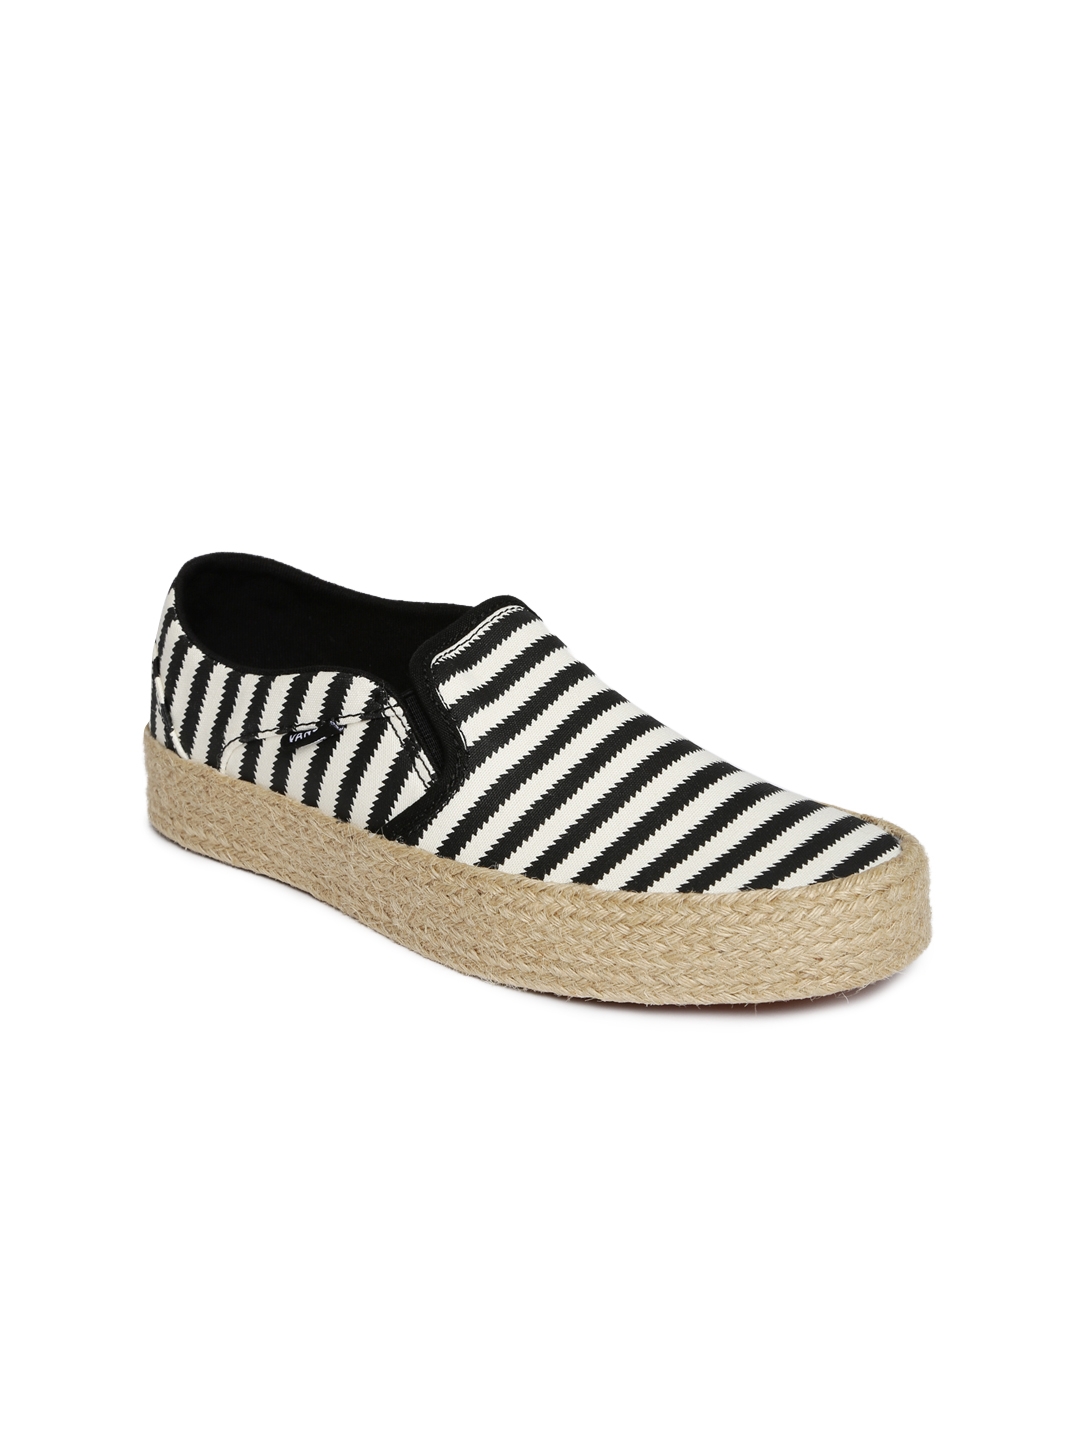 Buy Vans Women Black & Off White Striped Asher Espadrilles - Casual Shoes  for Women 1478373 | Myntra